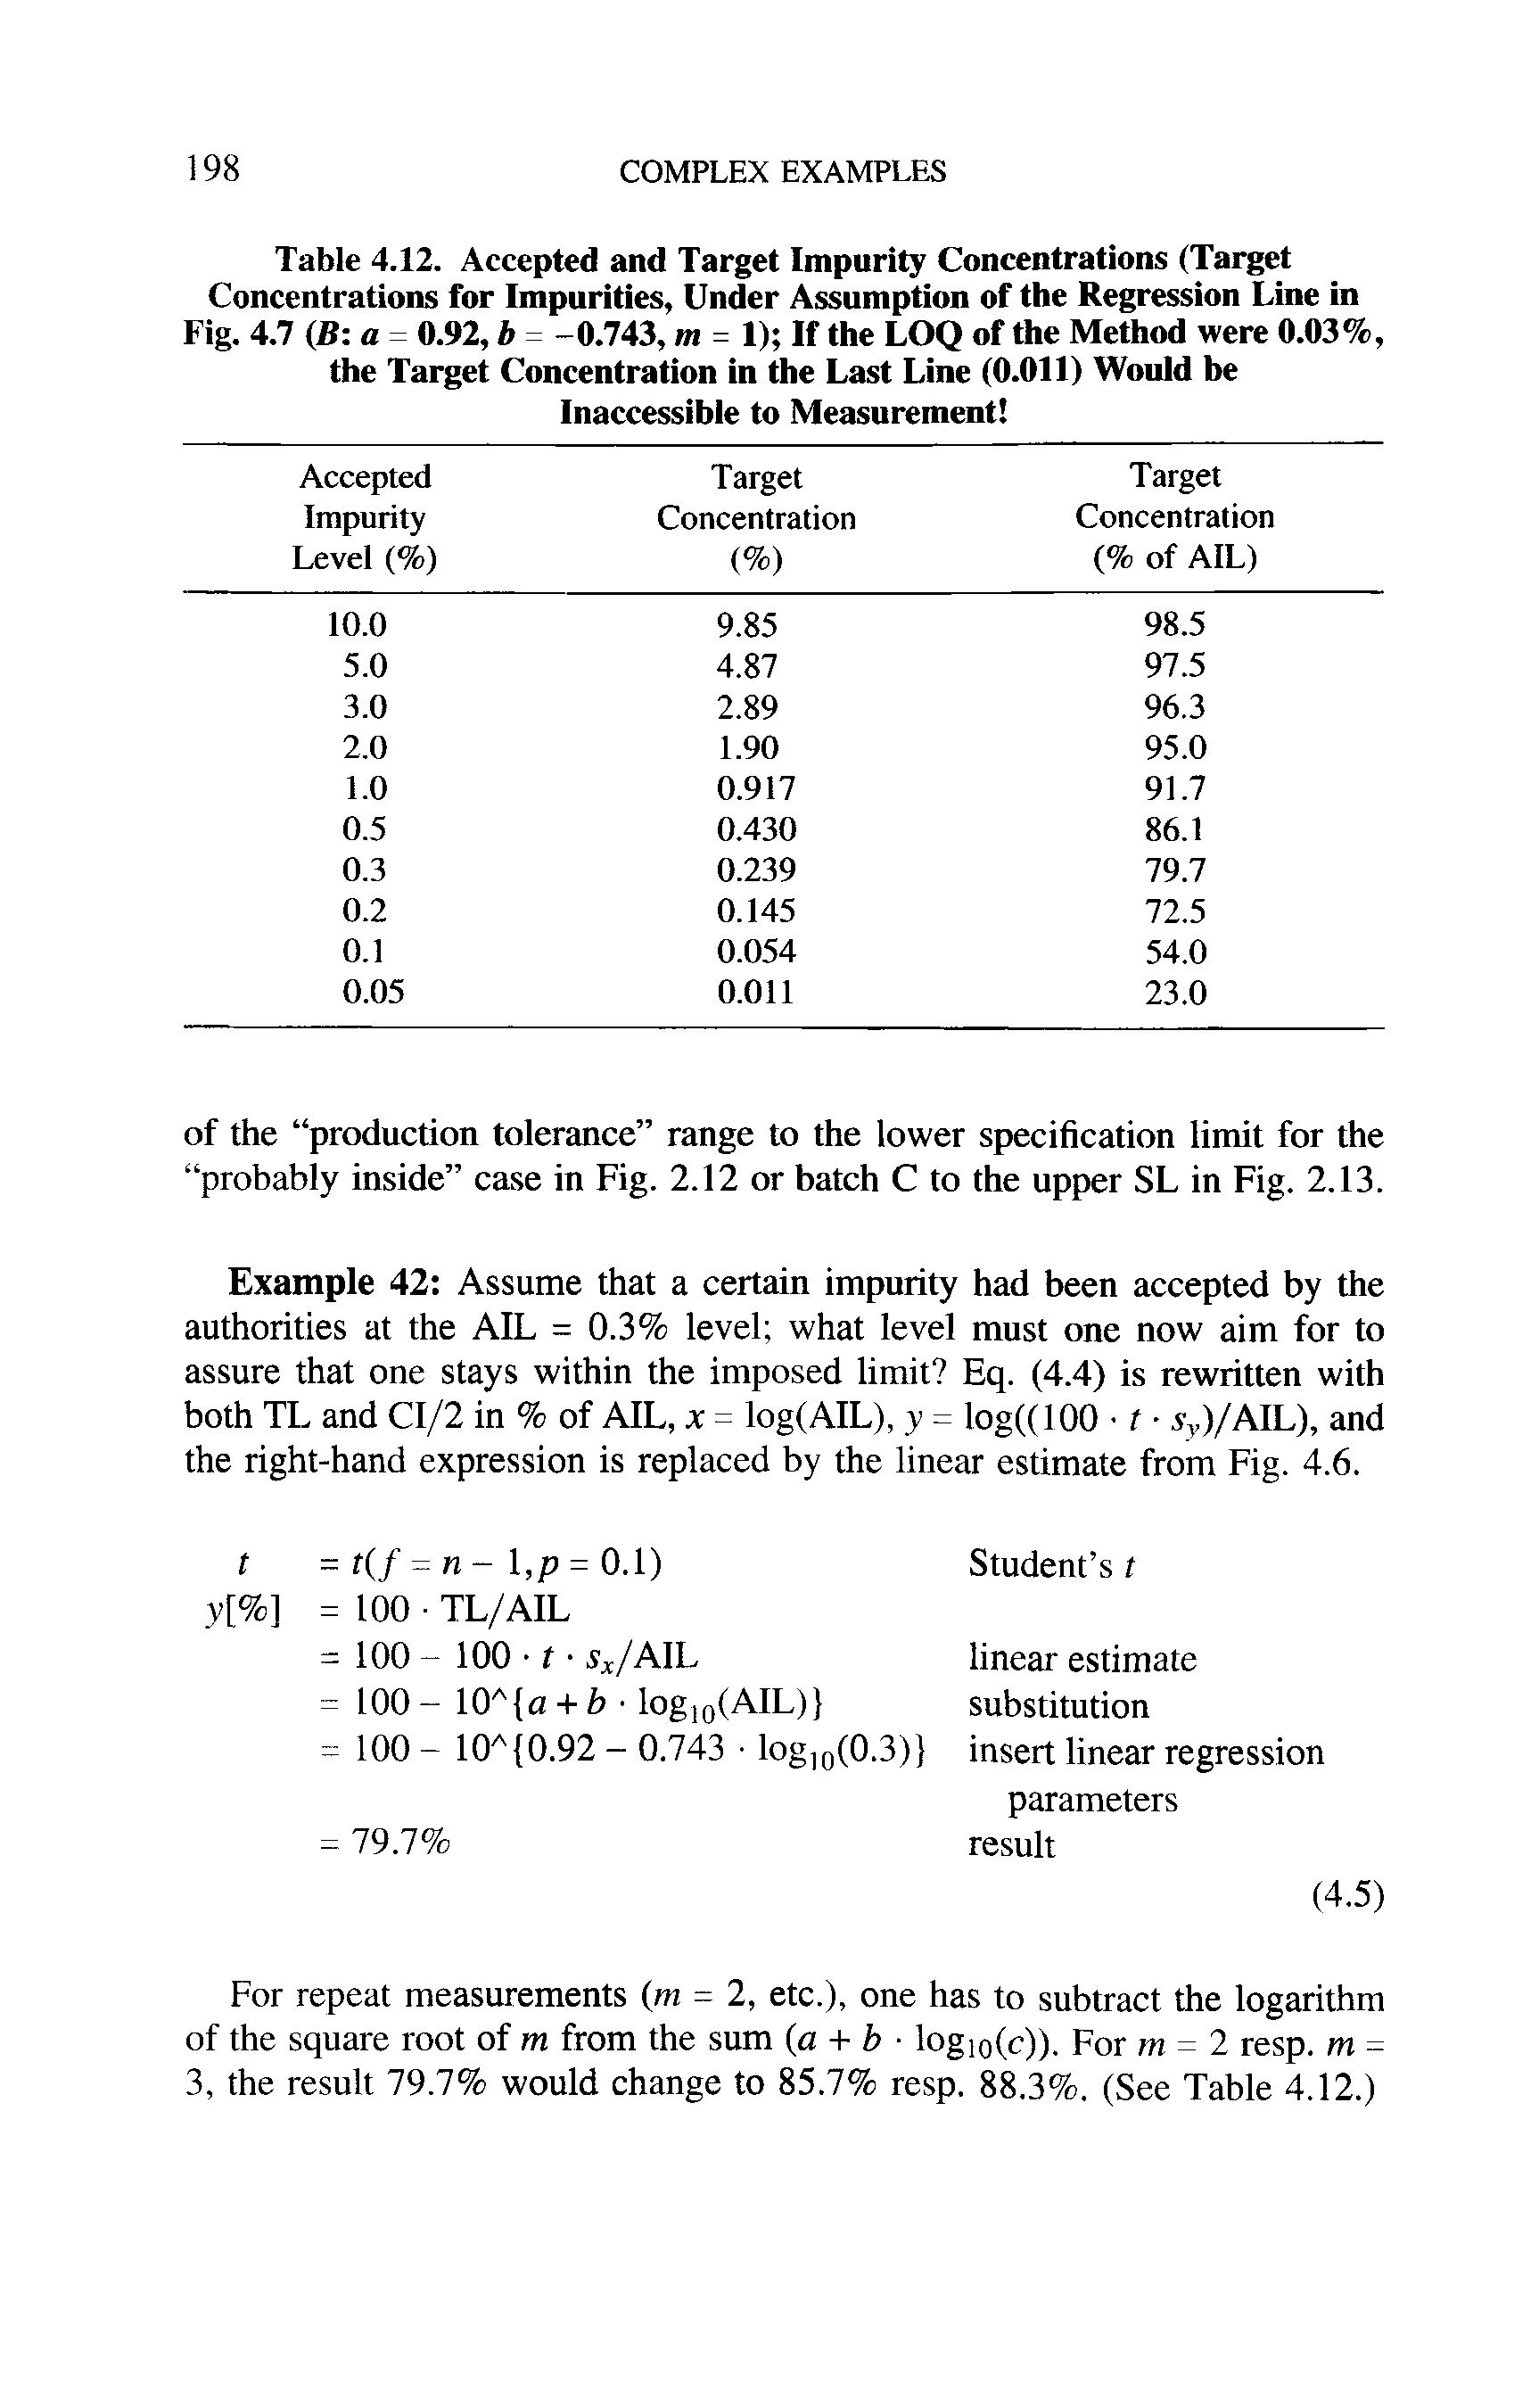 Table 4.12. Accepted and Target Impurity Concentrations (Target Concentrations for Impurities, Under Assumption of the Regression Line in Fig. 4.7 (B a = 0.92, b = -0.743, m = 1) If the LOQ of the Method were 0.03%, the Target Concentration in the Last Line (0.011) Would he Inaccessible to Measurement ...